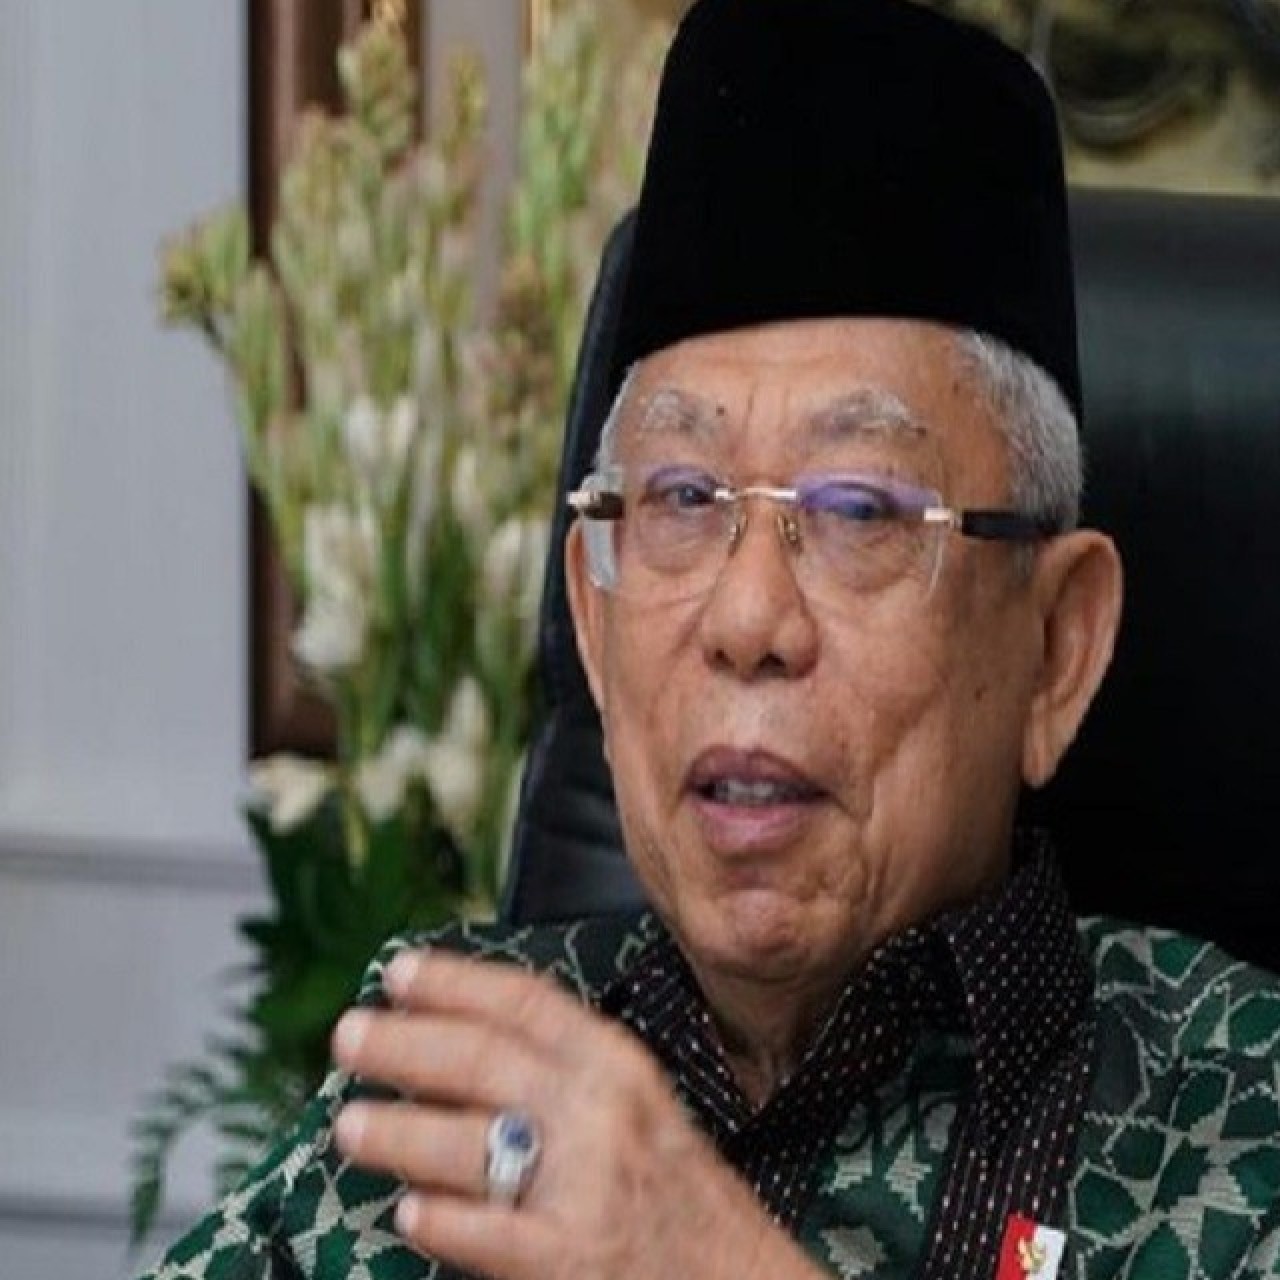 VP urges pesantren to adapt to global, technological changes